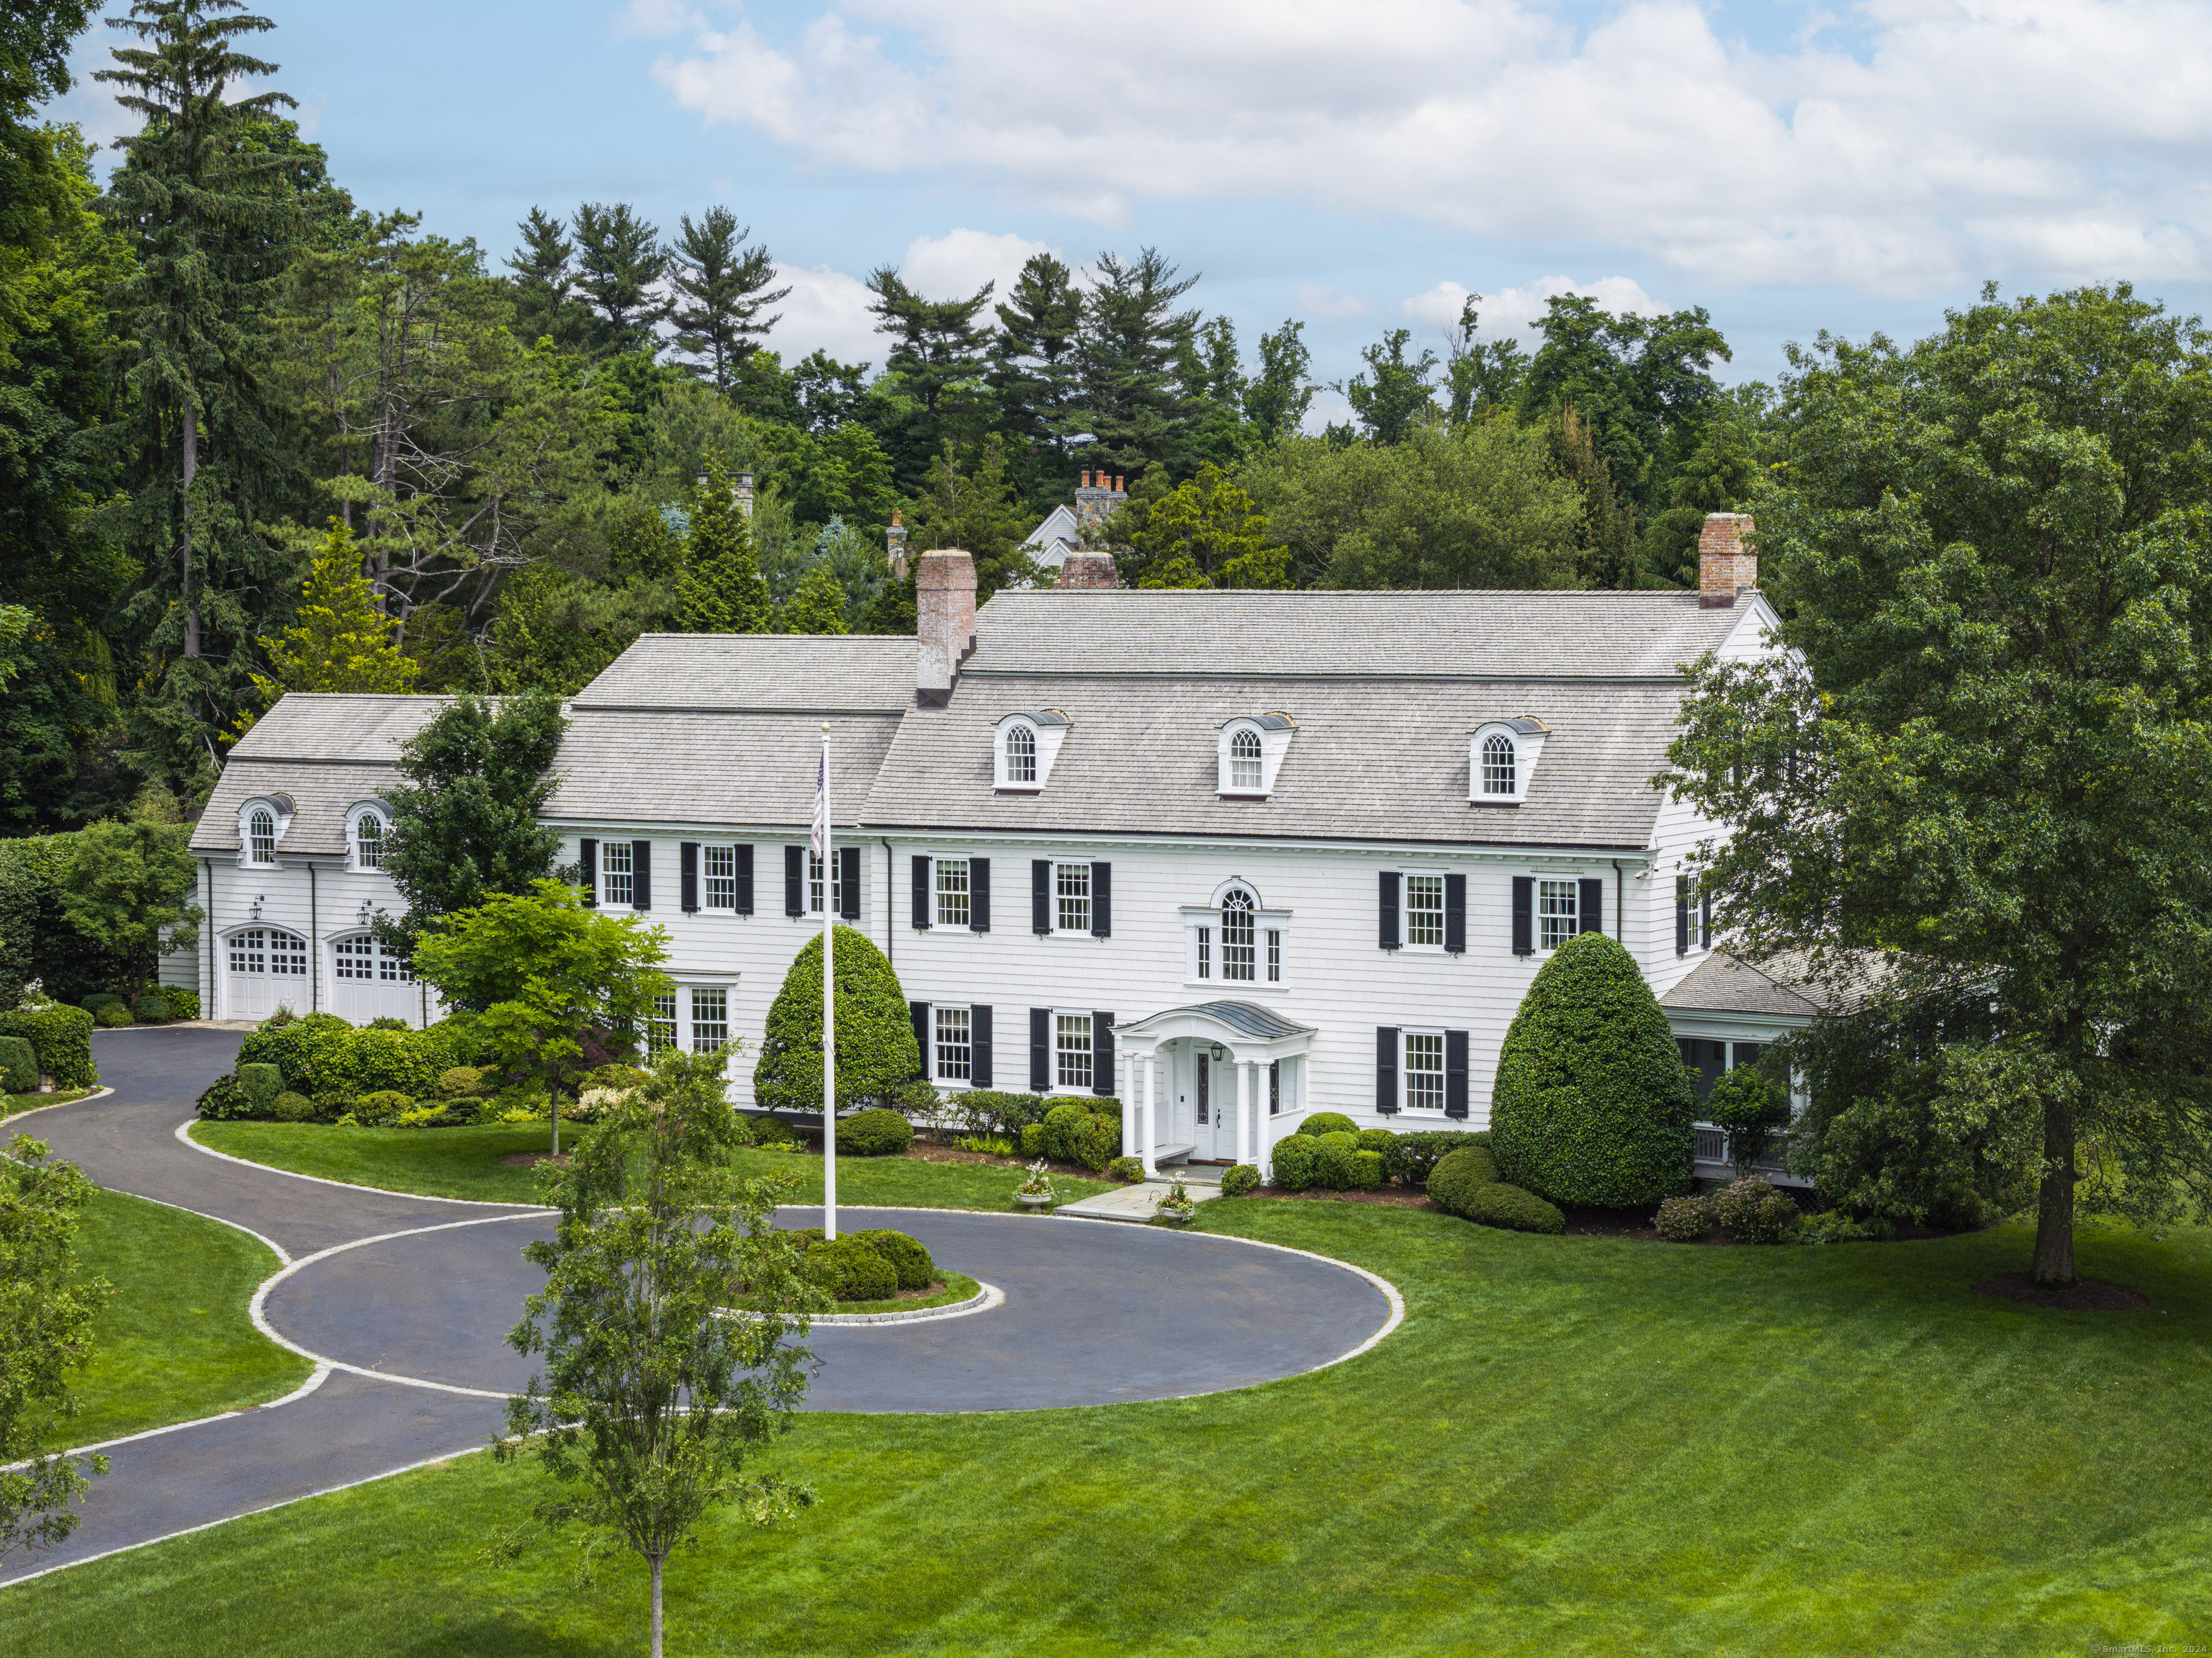 81 Canoe Hill Road, New Canaan, Connecticut - 6 Bedrooms  
7.5 Bathrooms  
16 Rooms - 